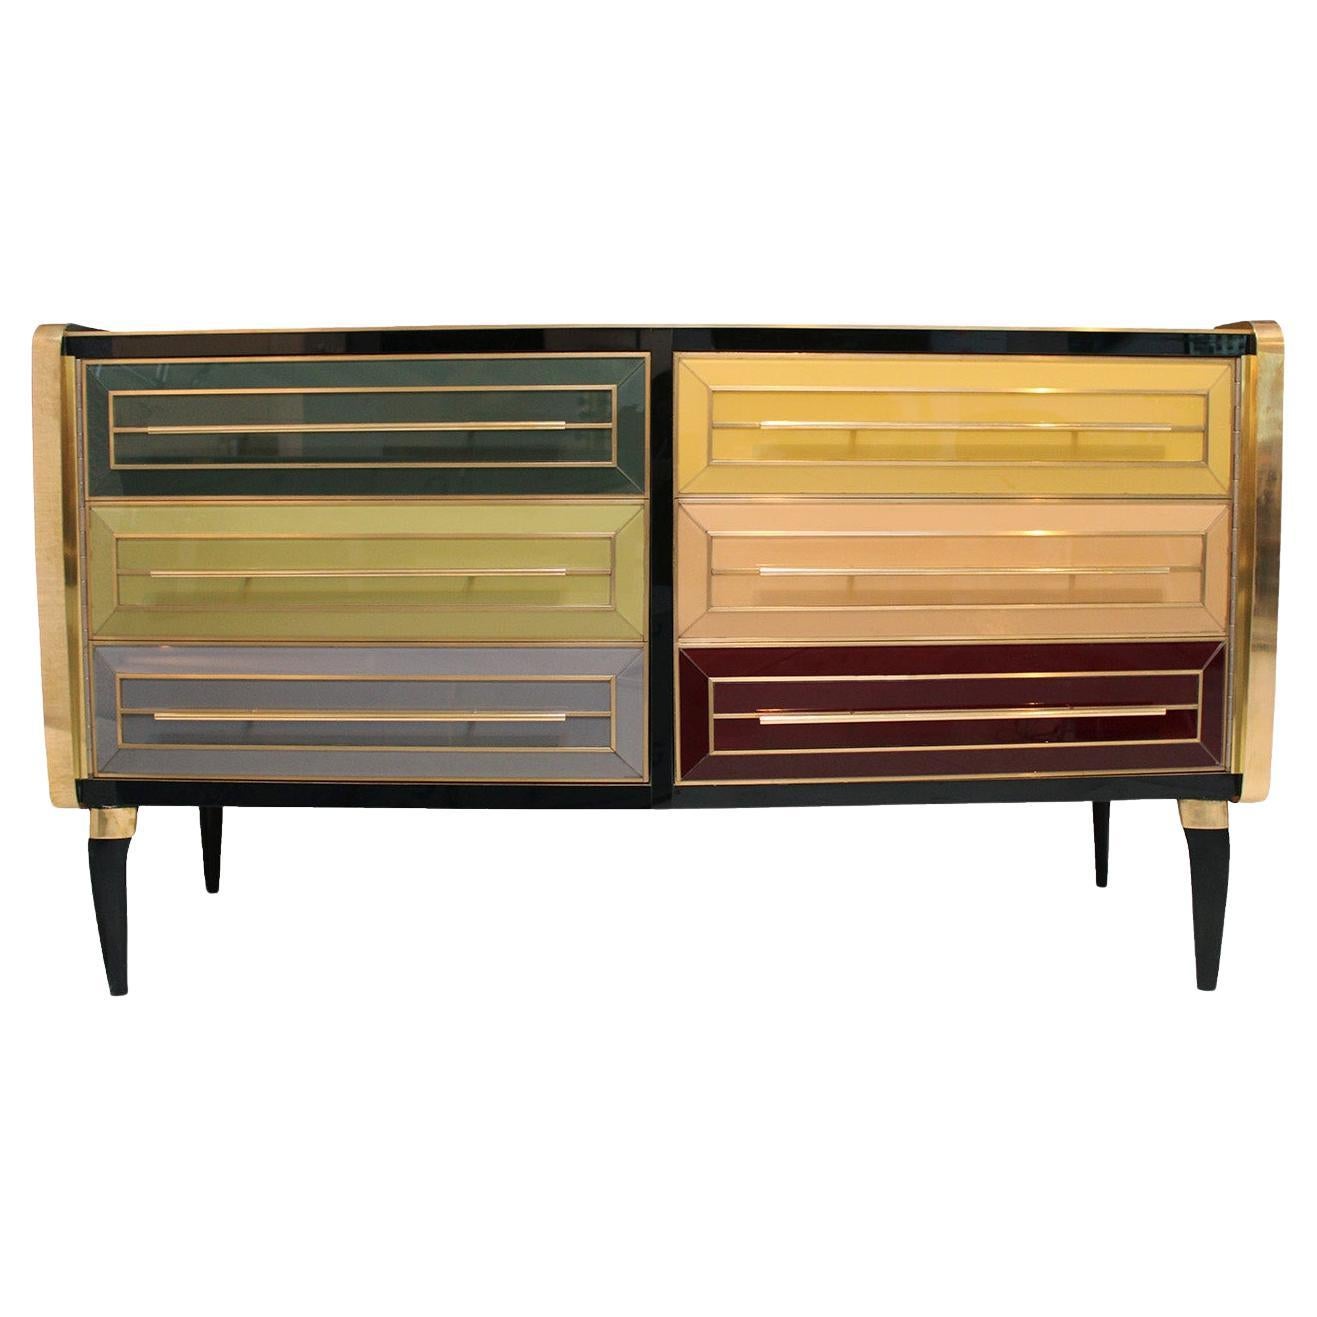 Solid Wood And Colored Glass Bar Furniture, Italy 1950's